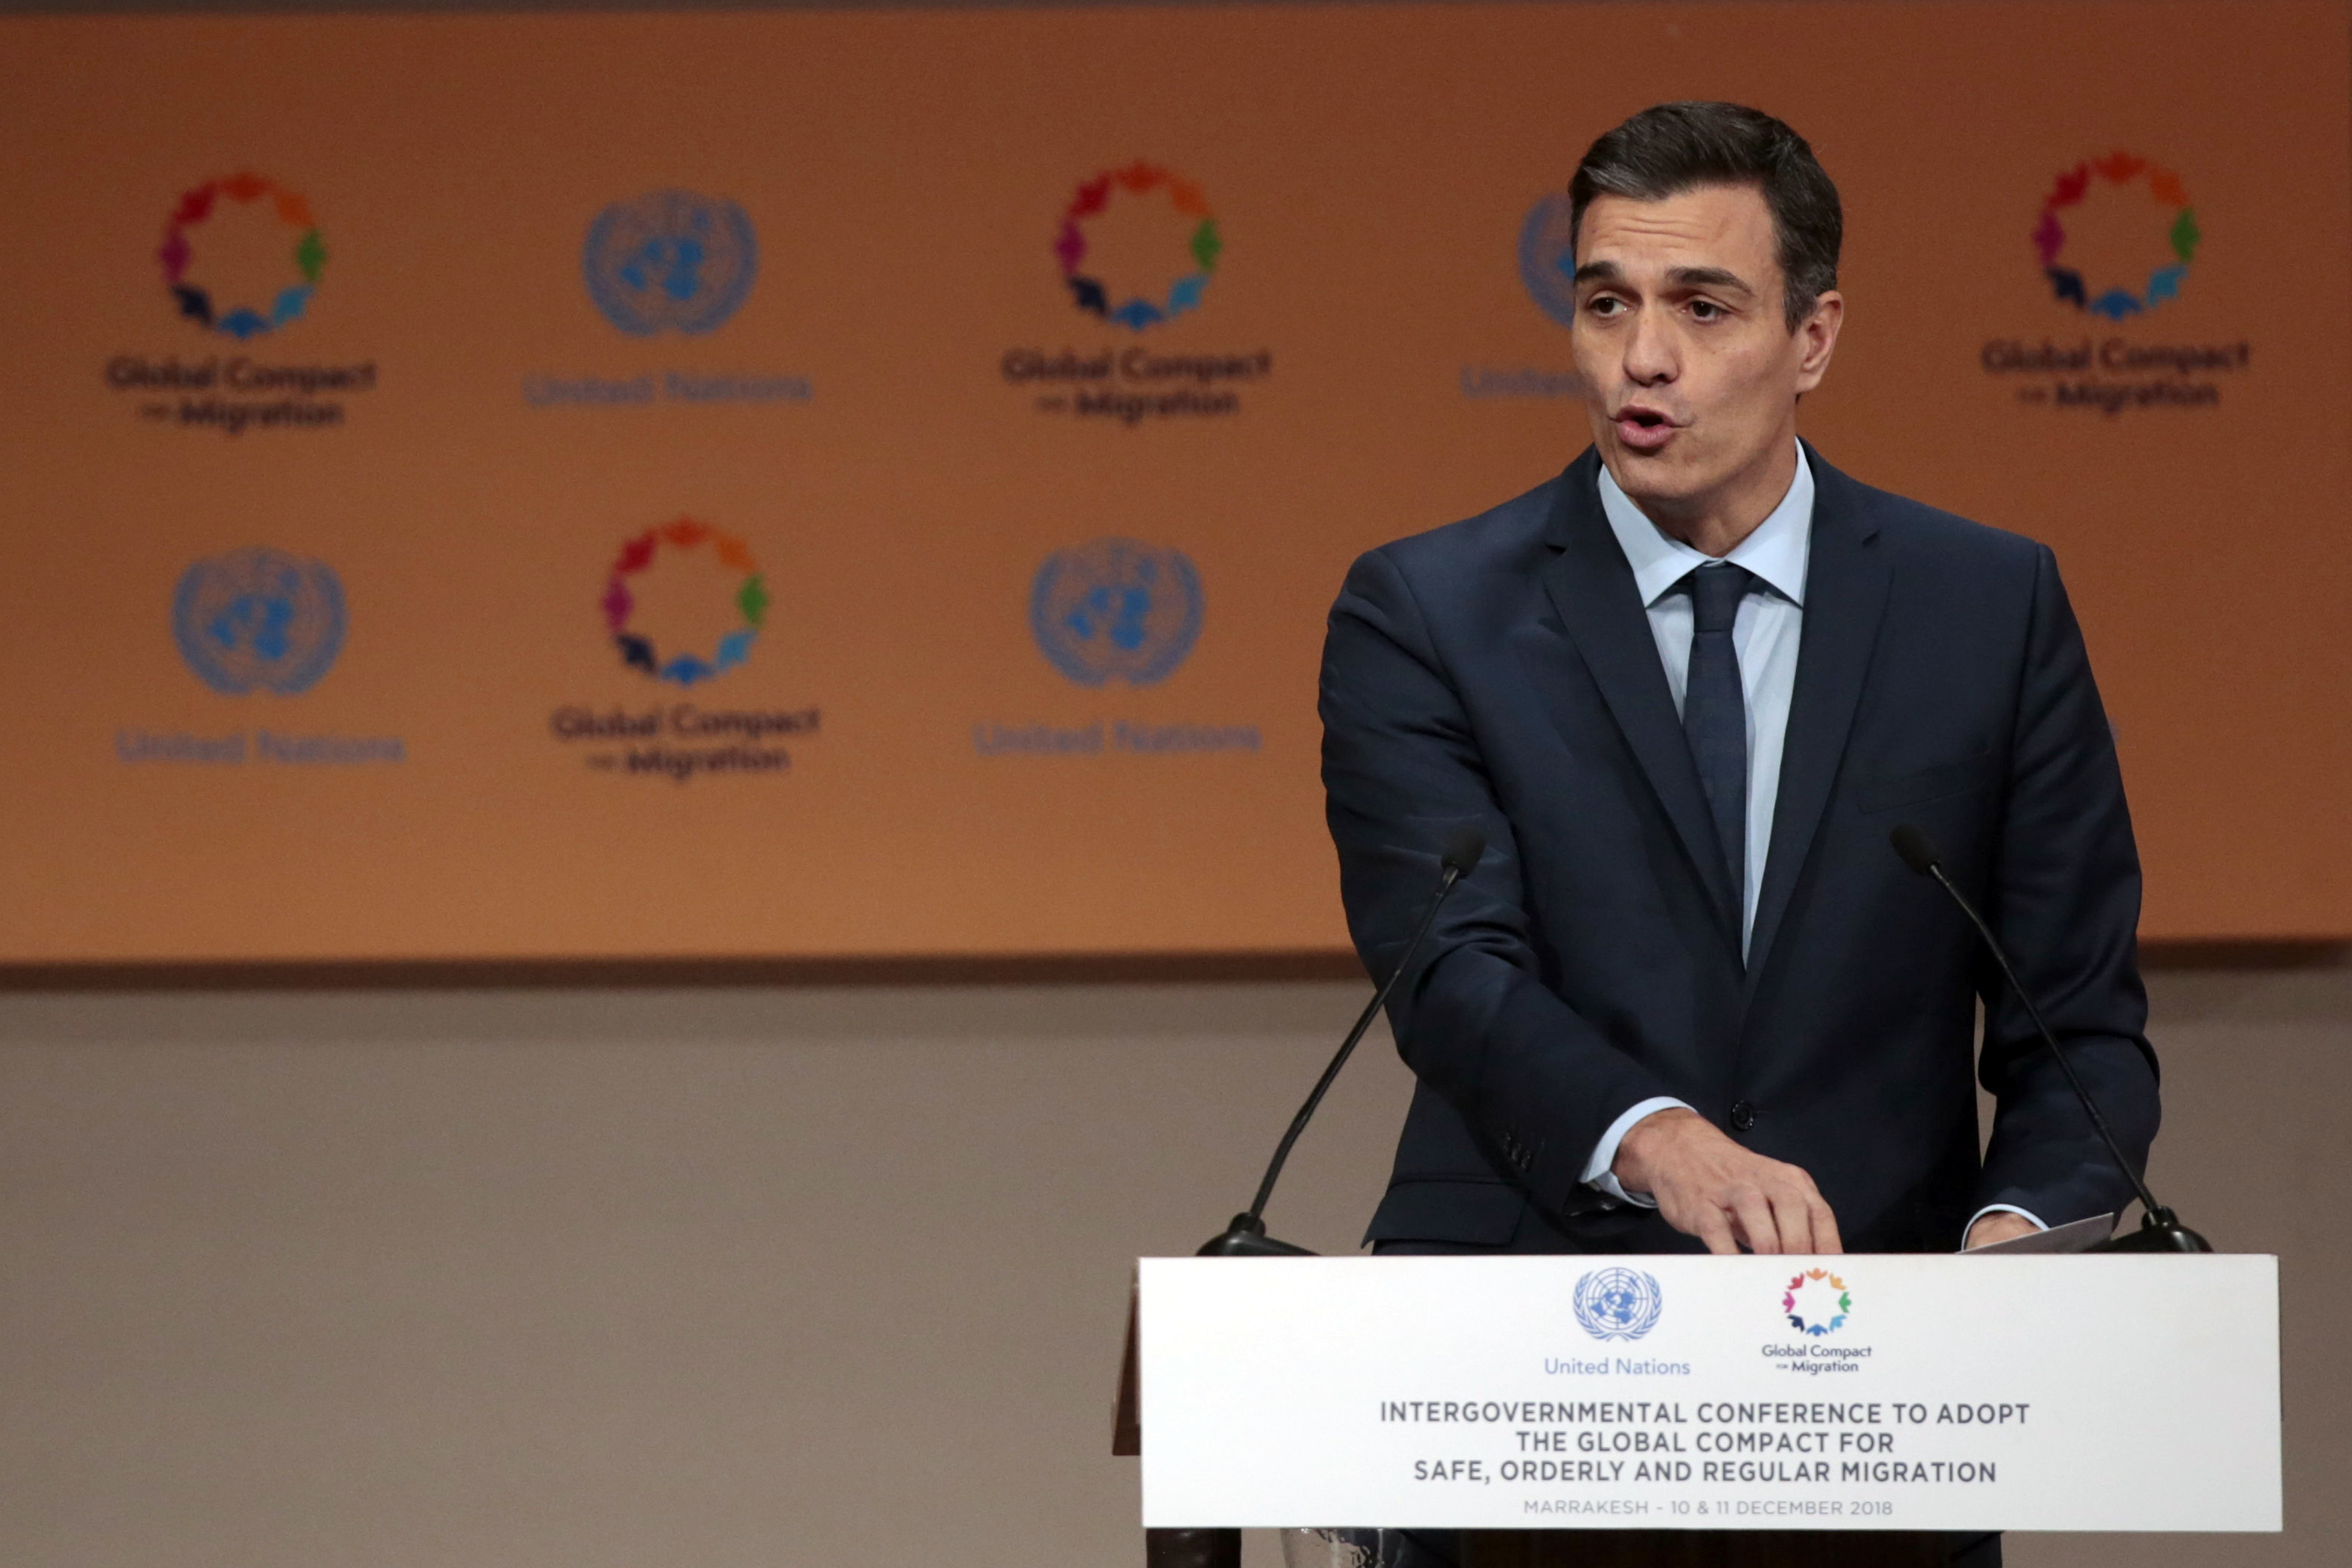 Spain's Prime Minister Pedro Sanchez addresses delegates during the opening session of a UN Migration Conference in Marrakech, Morocco, Monday, Dec.10, 2018. Top U.N. officials and government leaders from about 150 countries are uniting around an agreement on migration, while finding themselves on the defensive about the non-binding deal amid criticism and a walkout from the United States and some other countries. (AP Photo/Mosa'ab Elshamy)